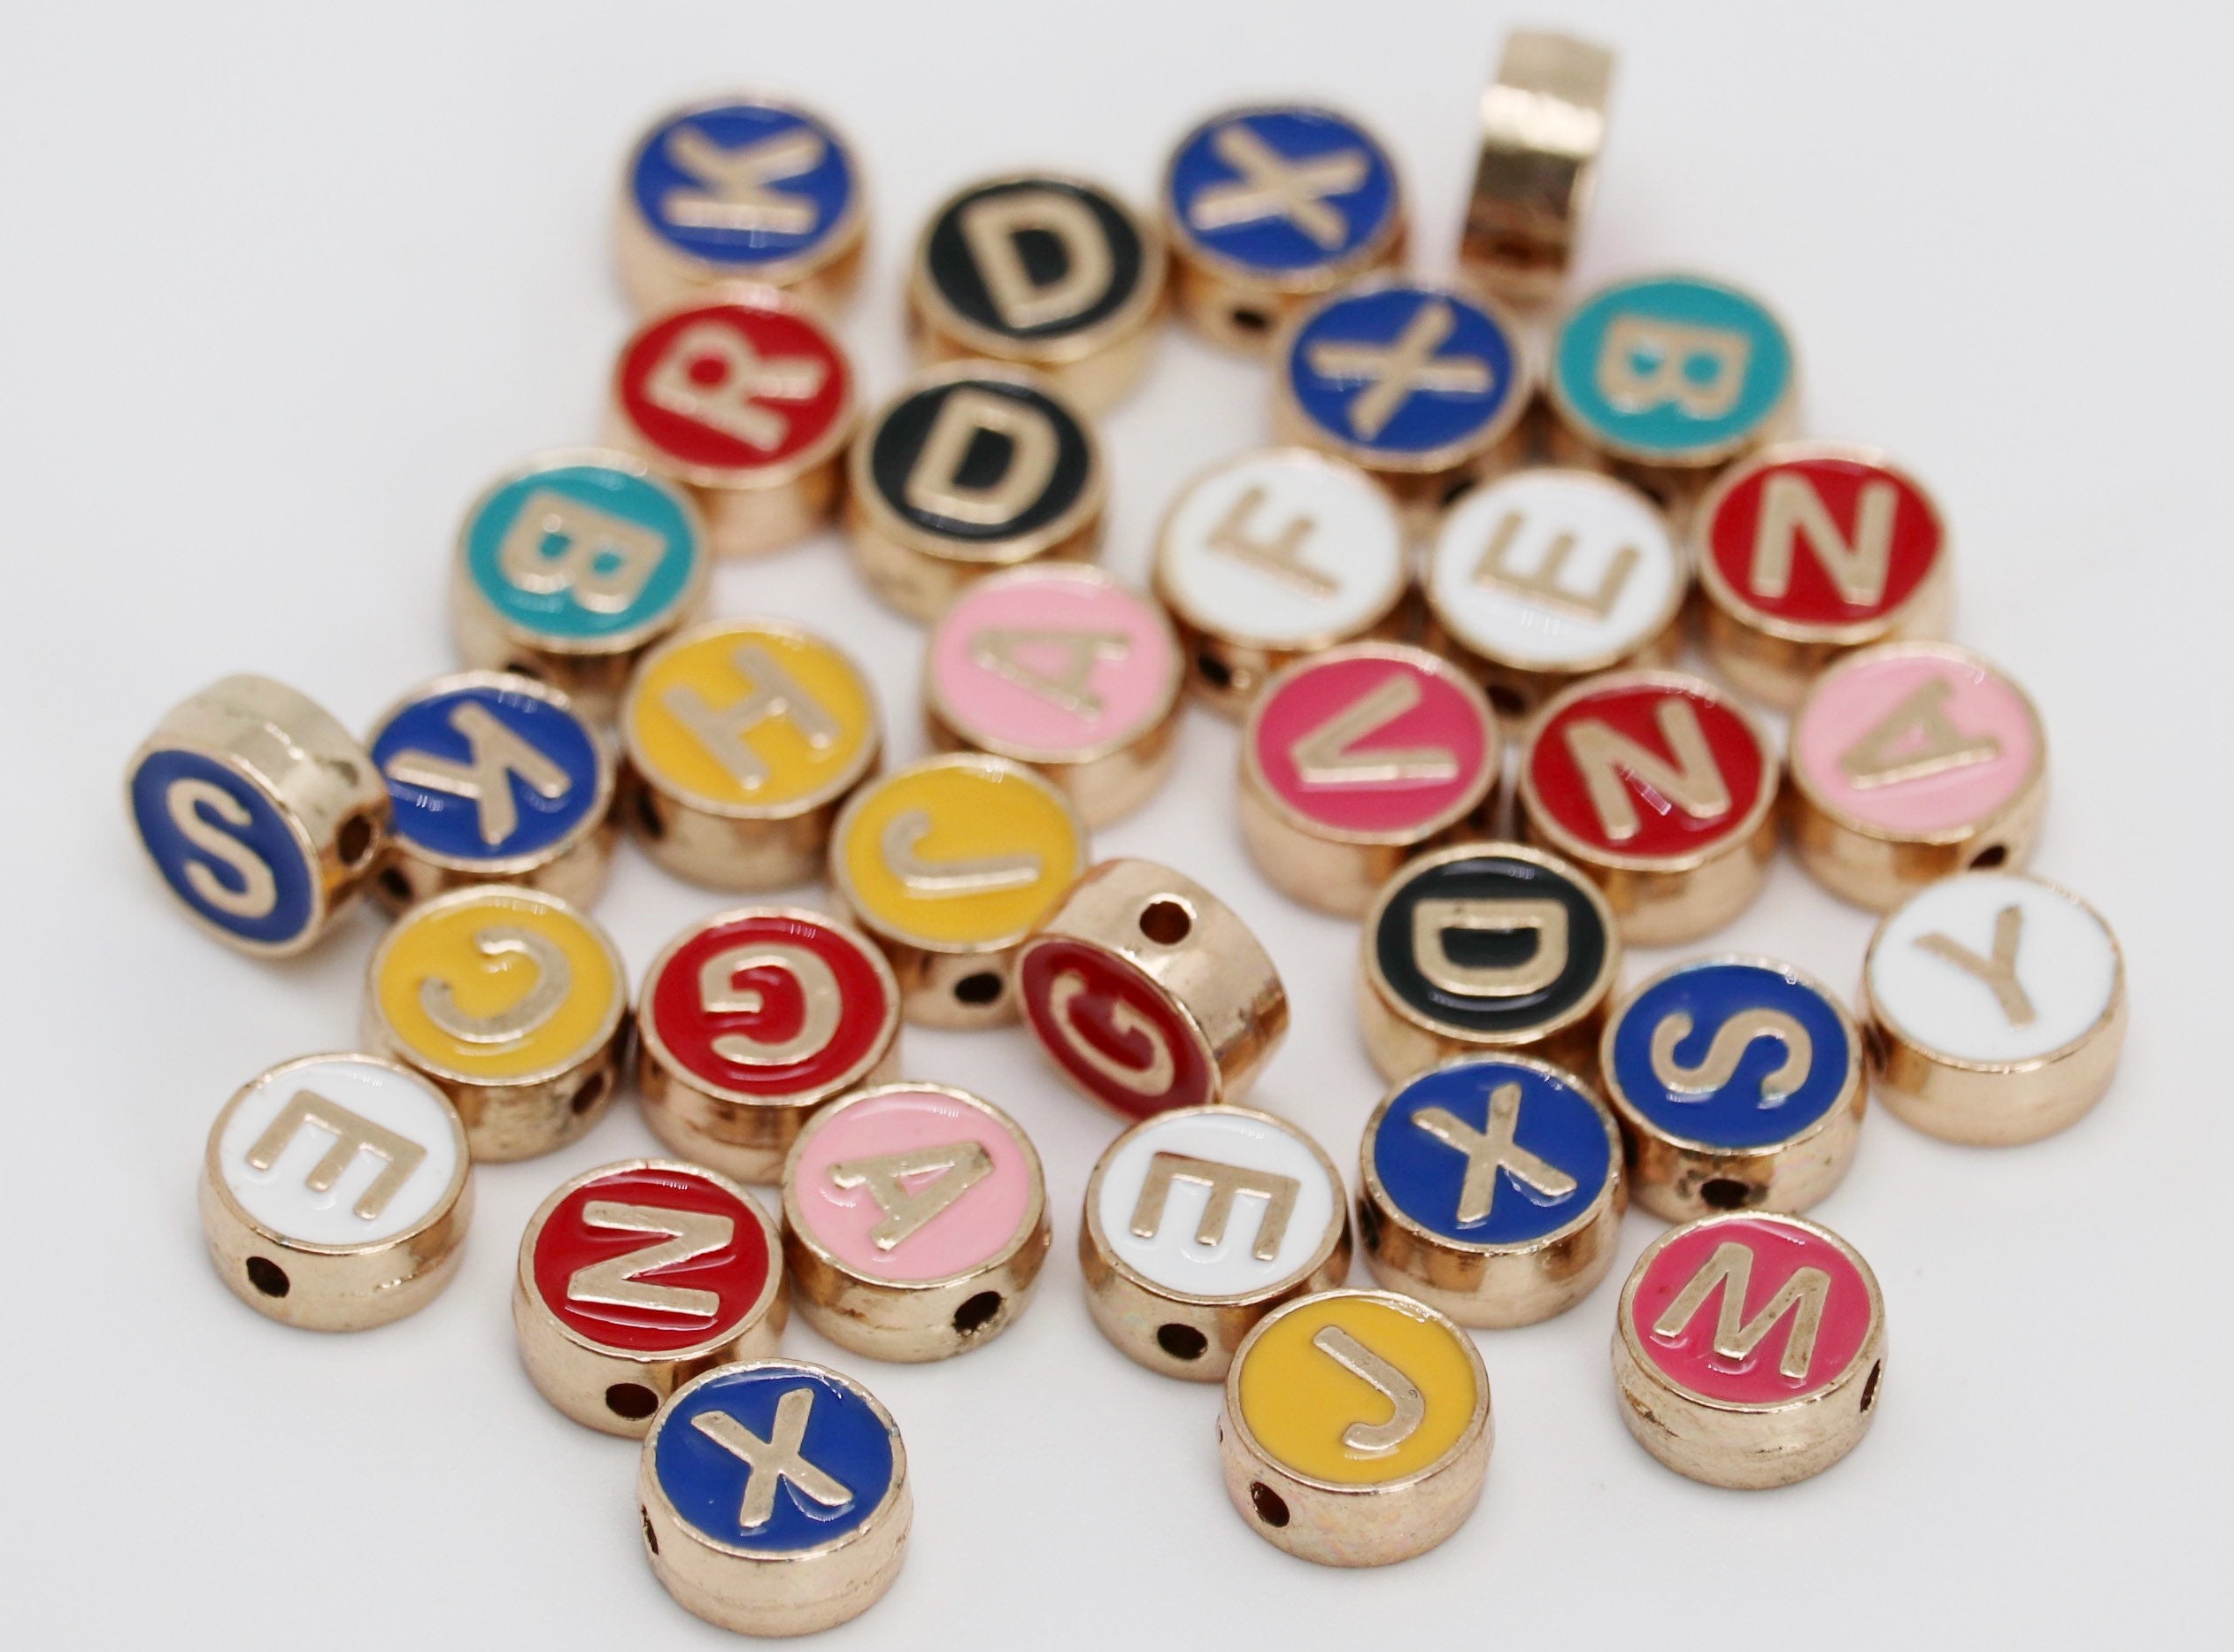 Hicarer 104 Pieces Mixed Letter Beads Enamel Metal Letter Charms Double Sided Initial Pendant A-Z Alphabet Charm for Necklace Bracelet Jewelry Making